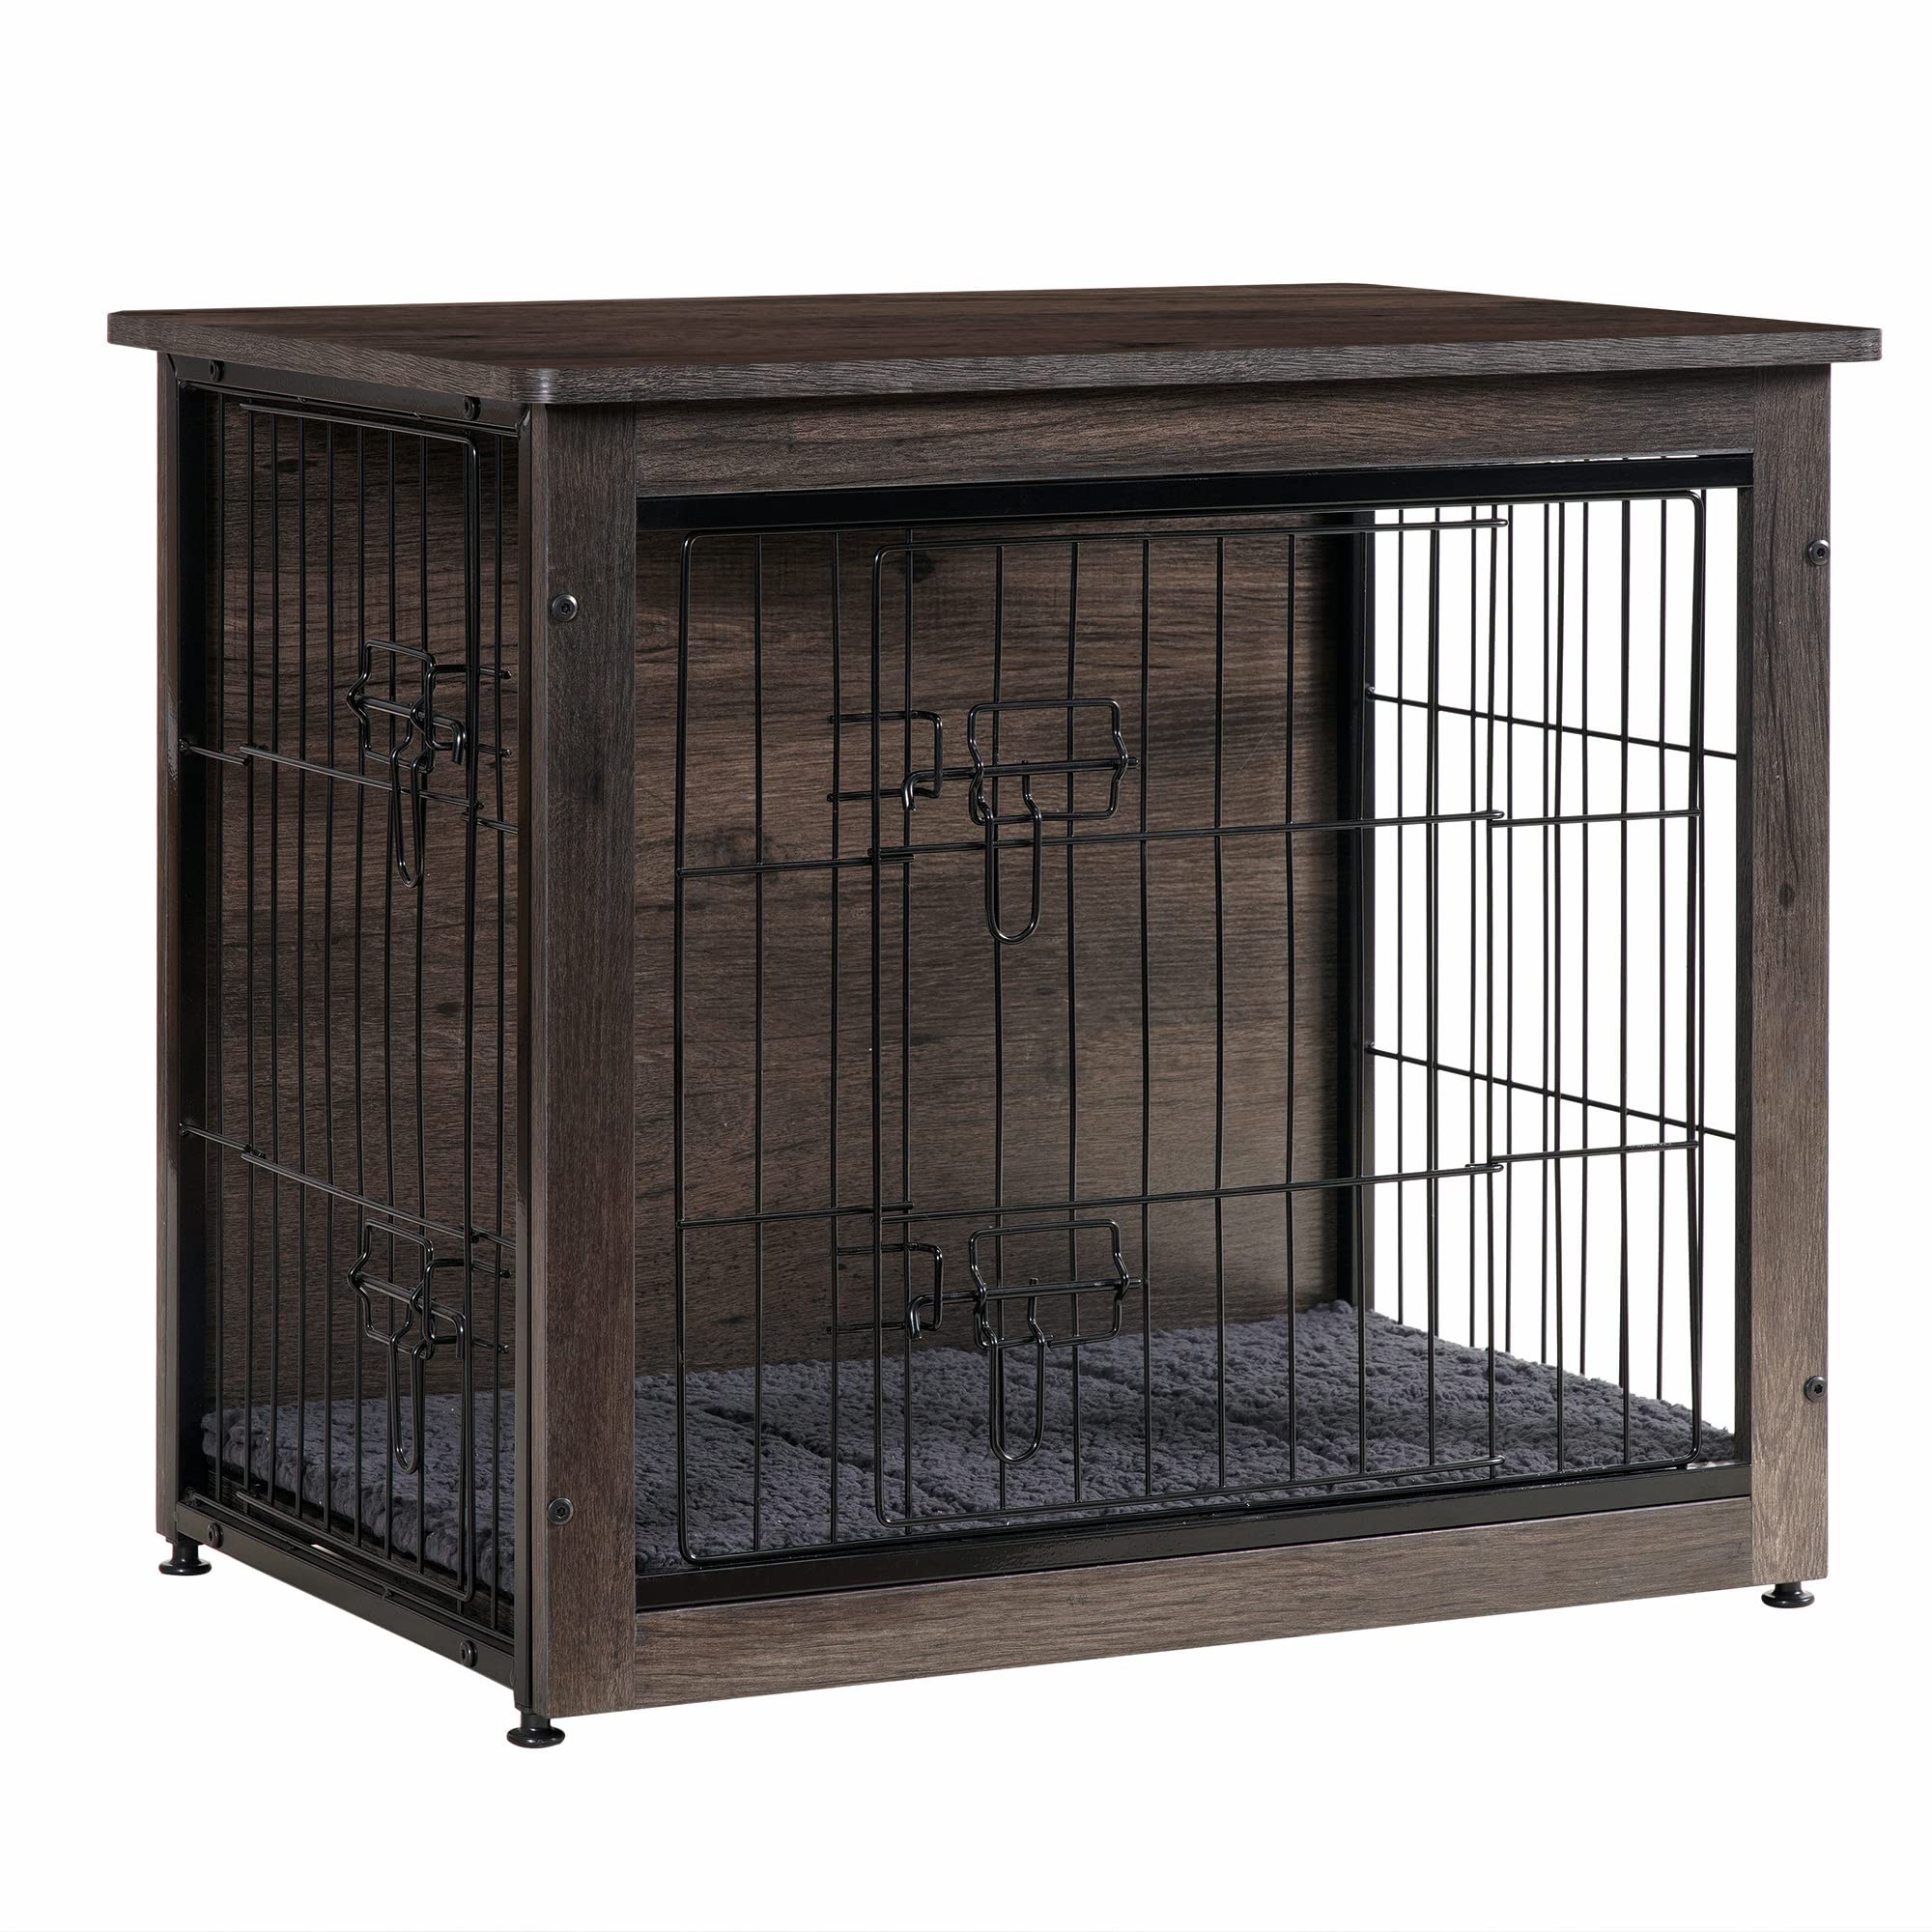 DWANTON Dog crate Furniture with cushion Wooden Dog crate with Double Doors Dog Furniture Indoor Dog Kennel End Table Sm